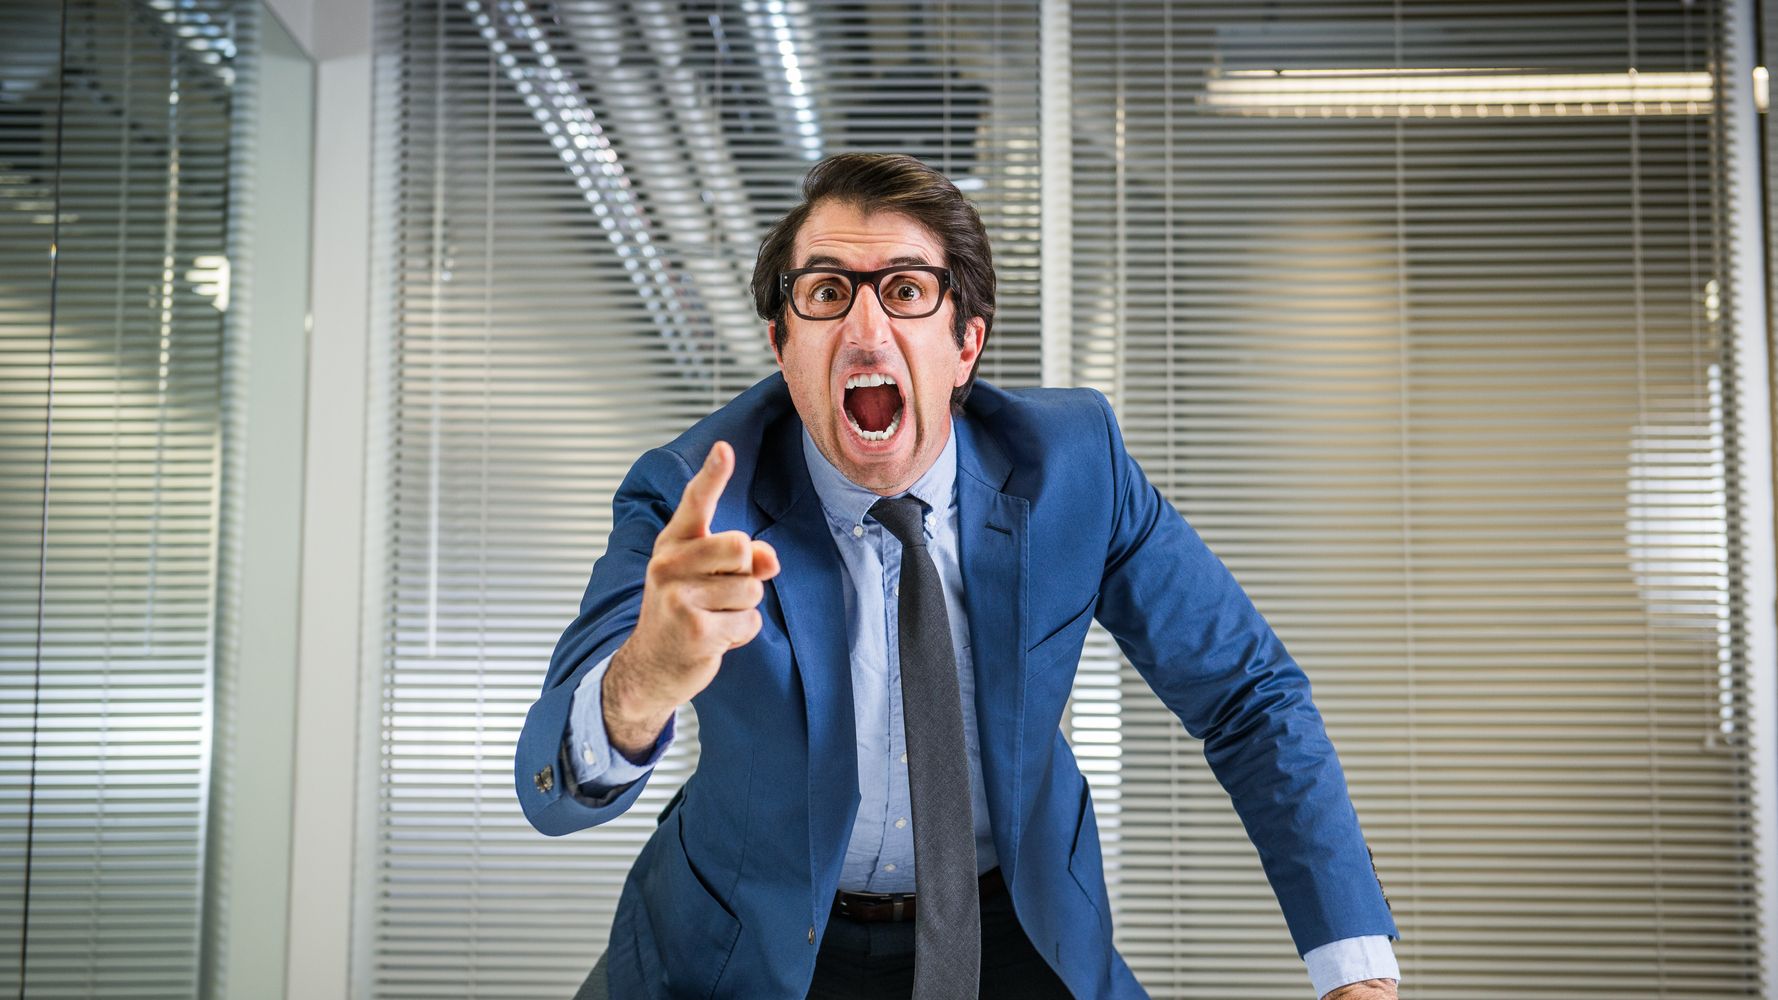 løber tør stamtavle mål These Are The 4 Work Habits That Drive Your Boss Crazy | HuffPost Life